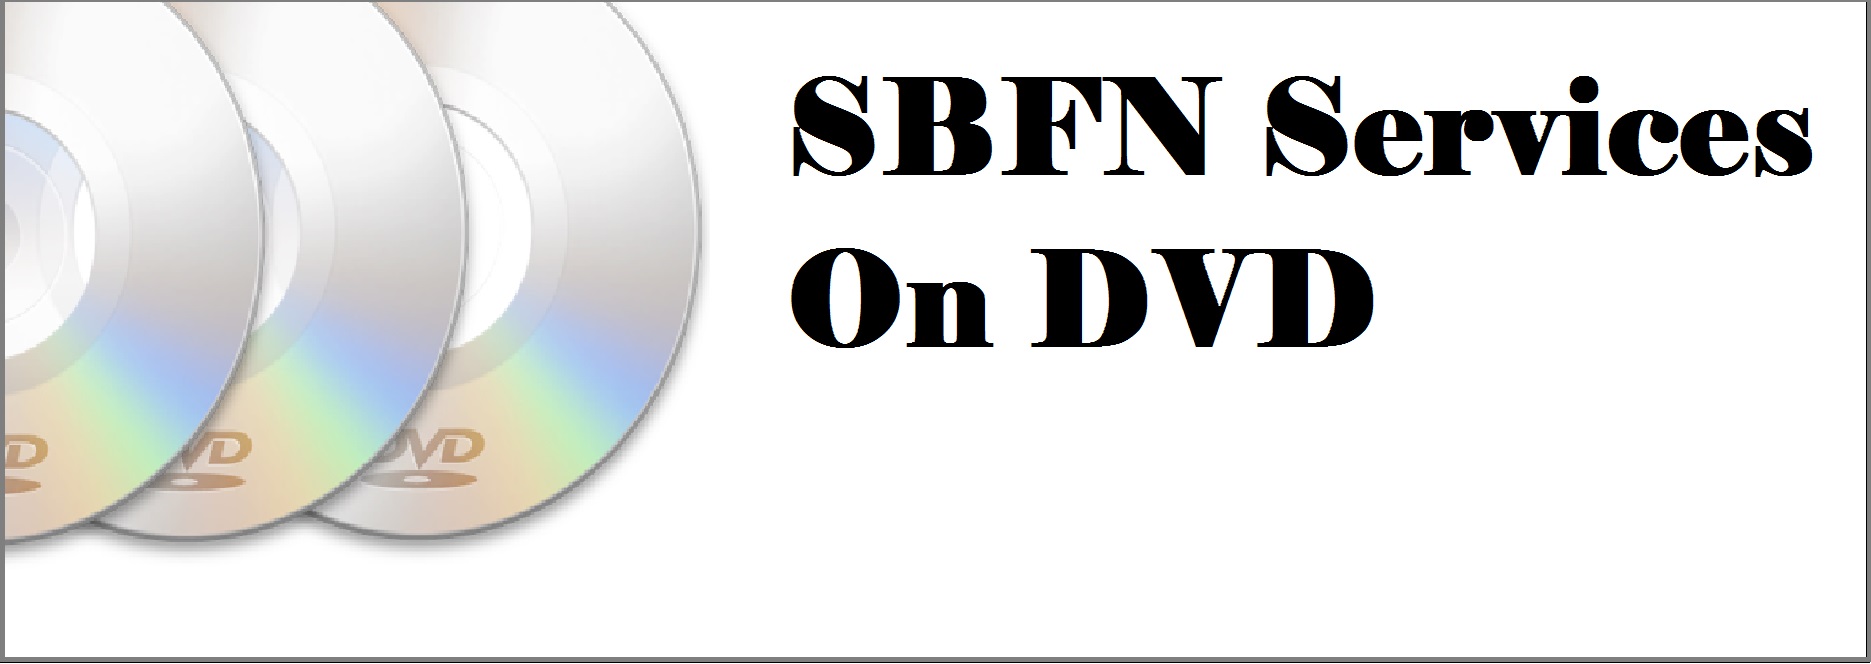 Thumbnail for the post titled: SBFN Services on DVD